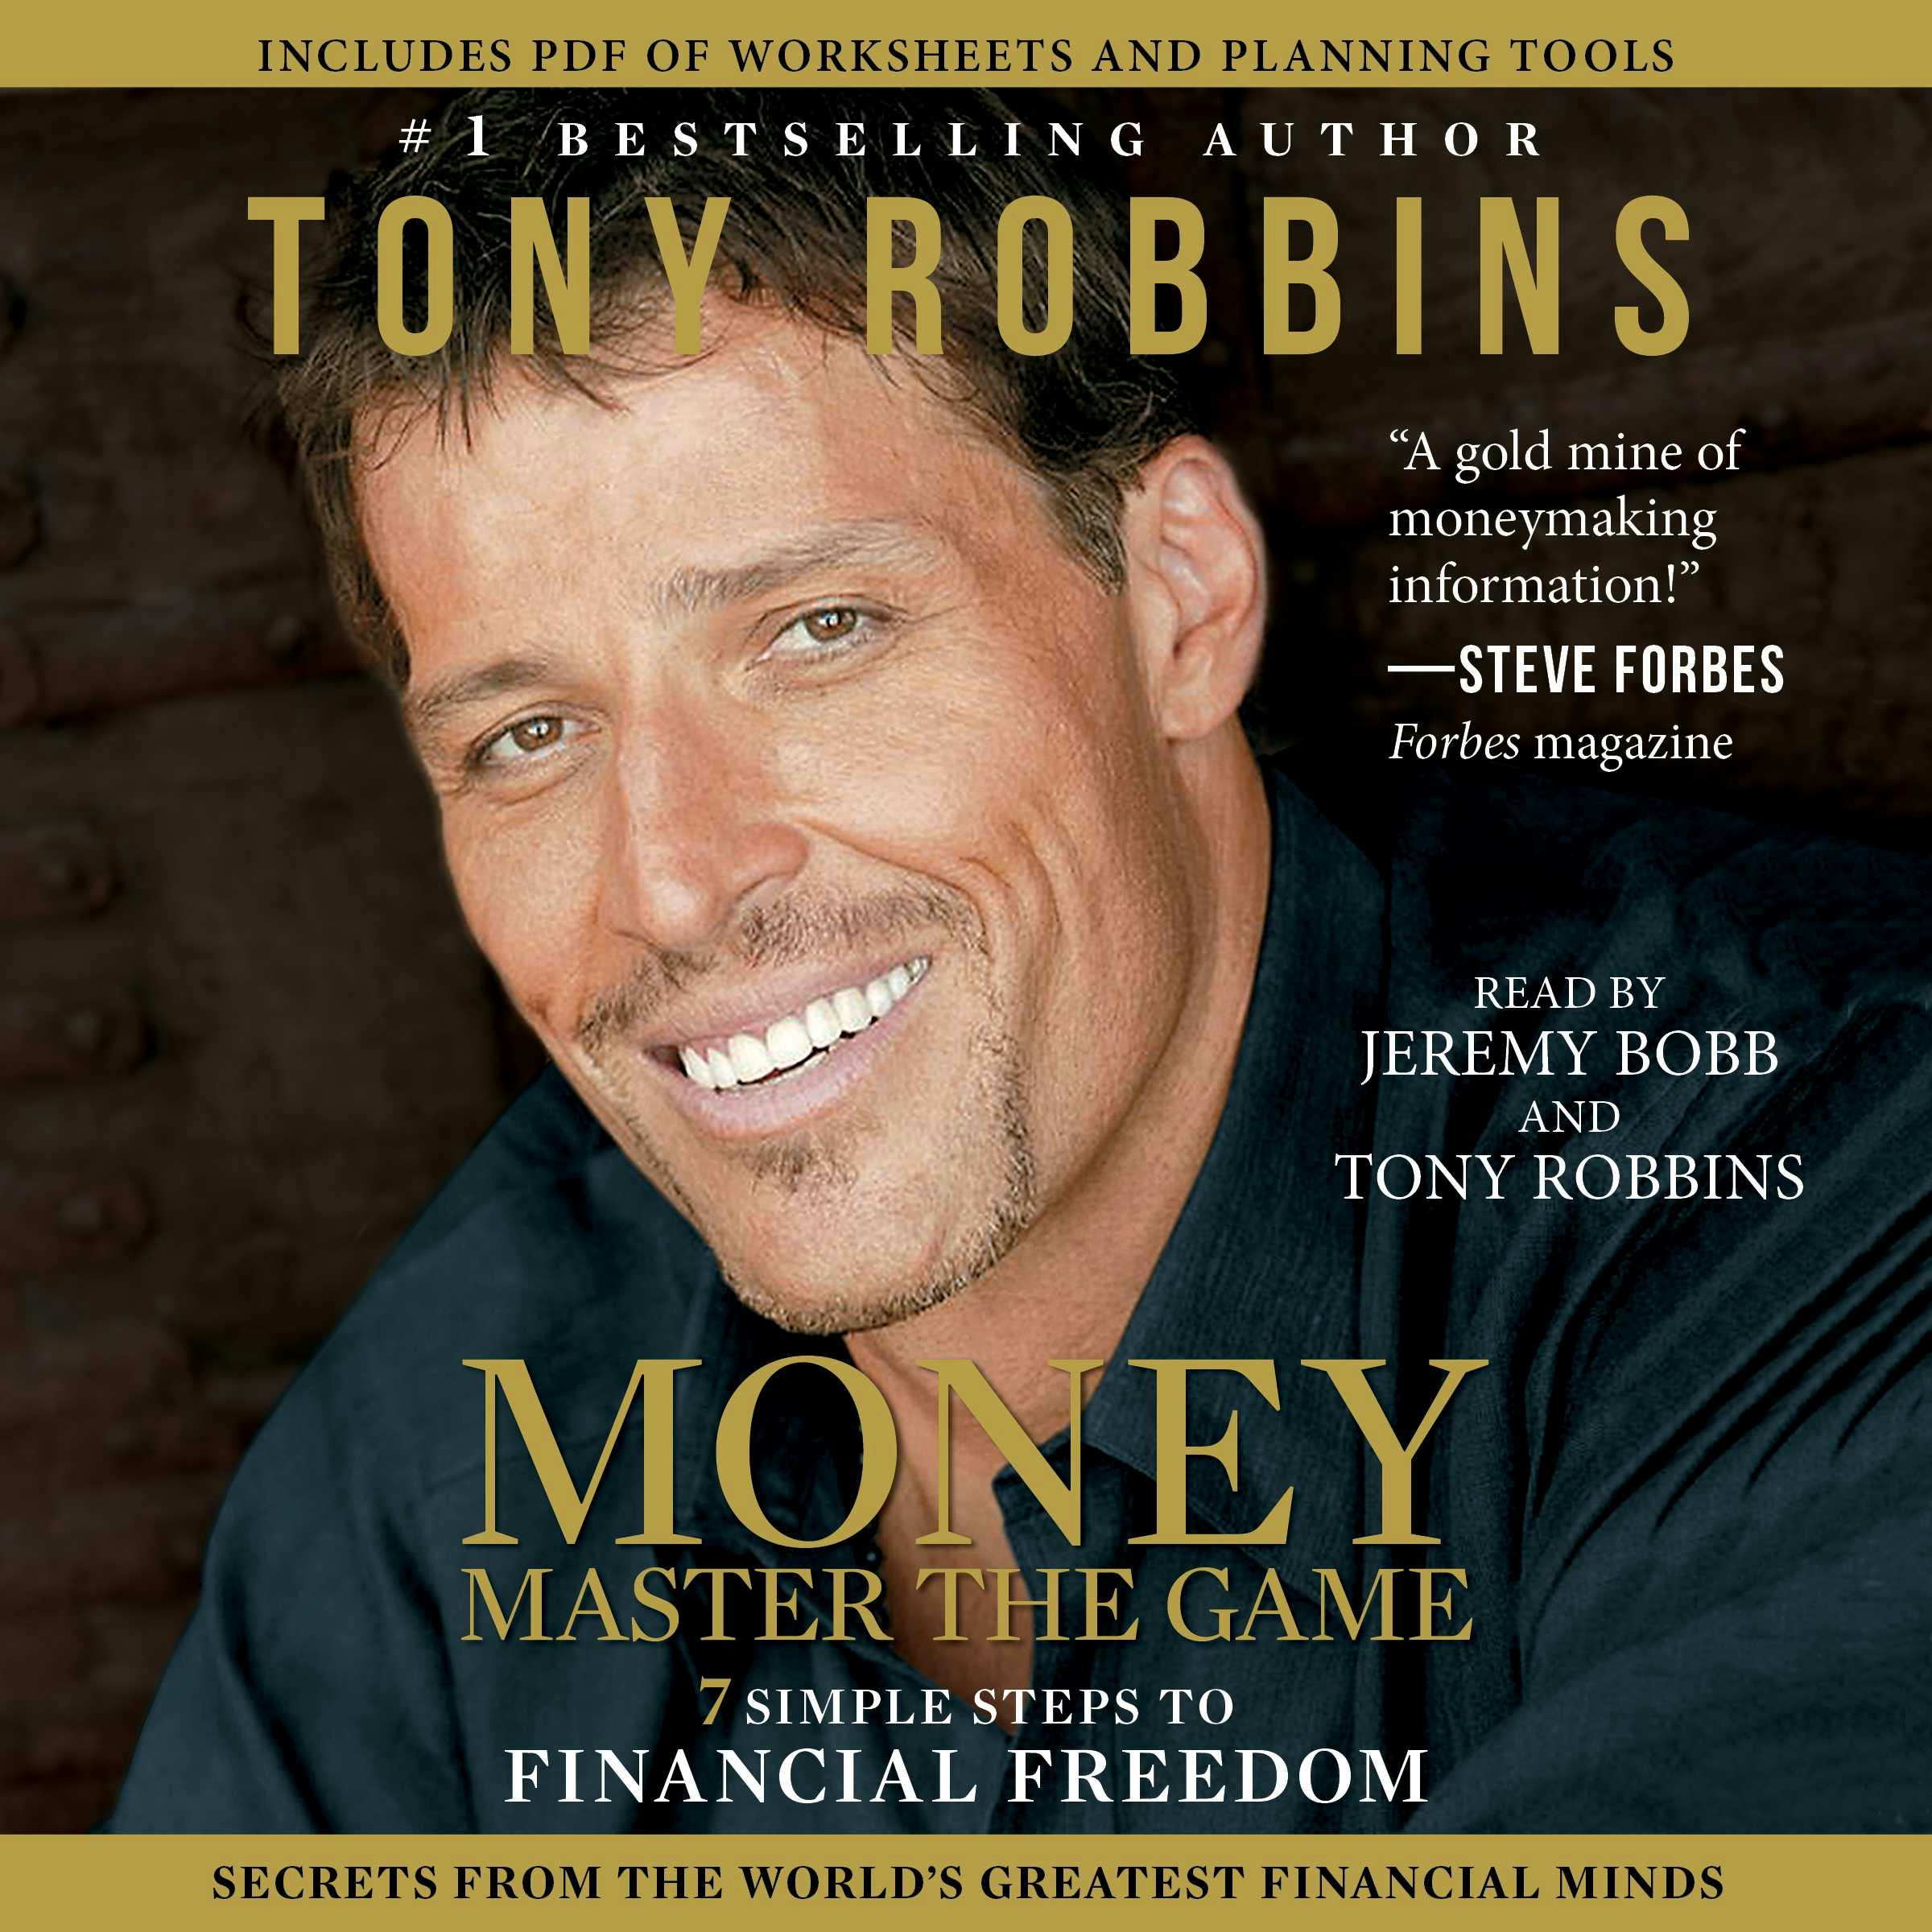 MONEY Master the Game: 7 Simple Steps to Financial Freedom - undefined